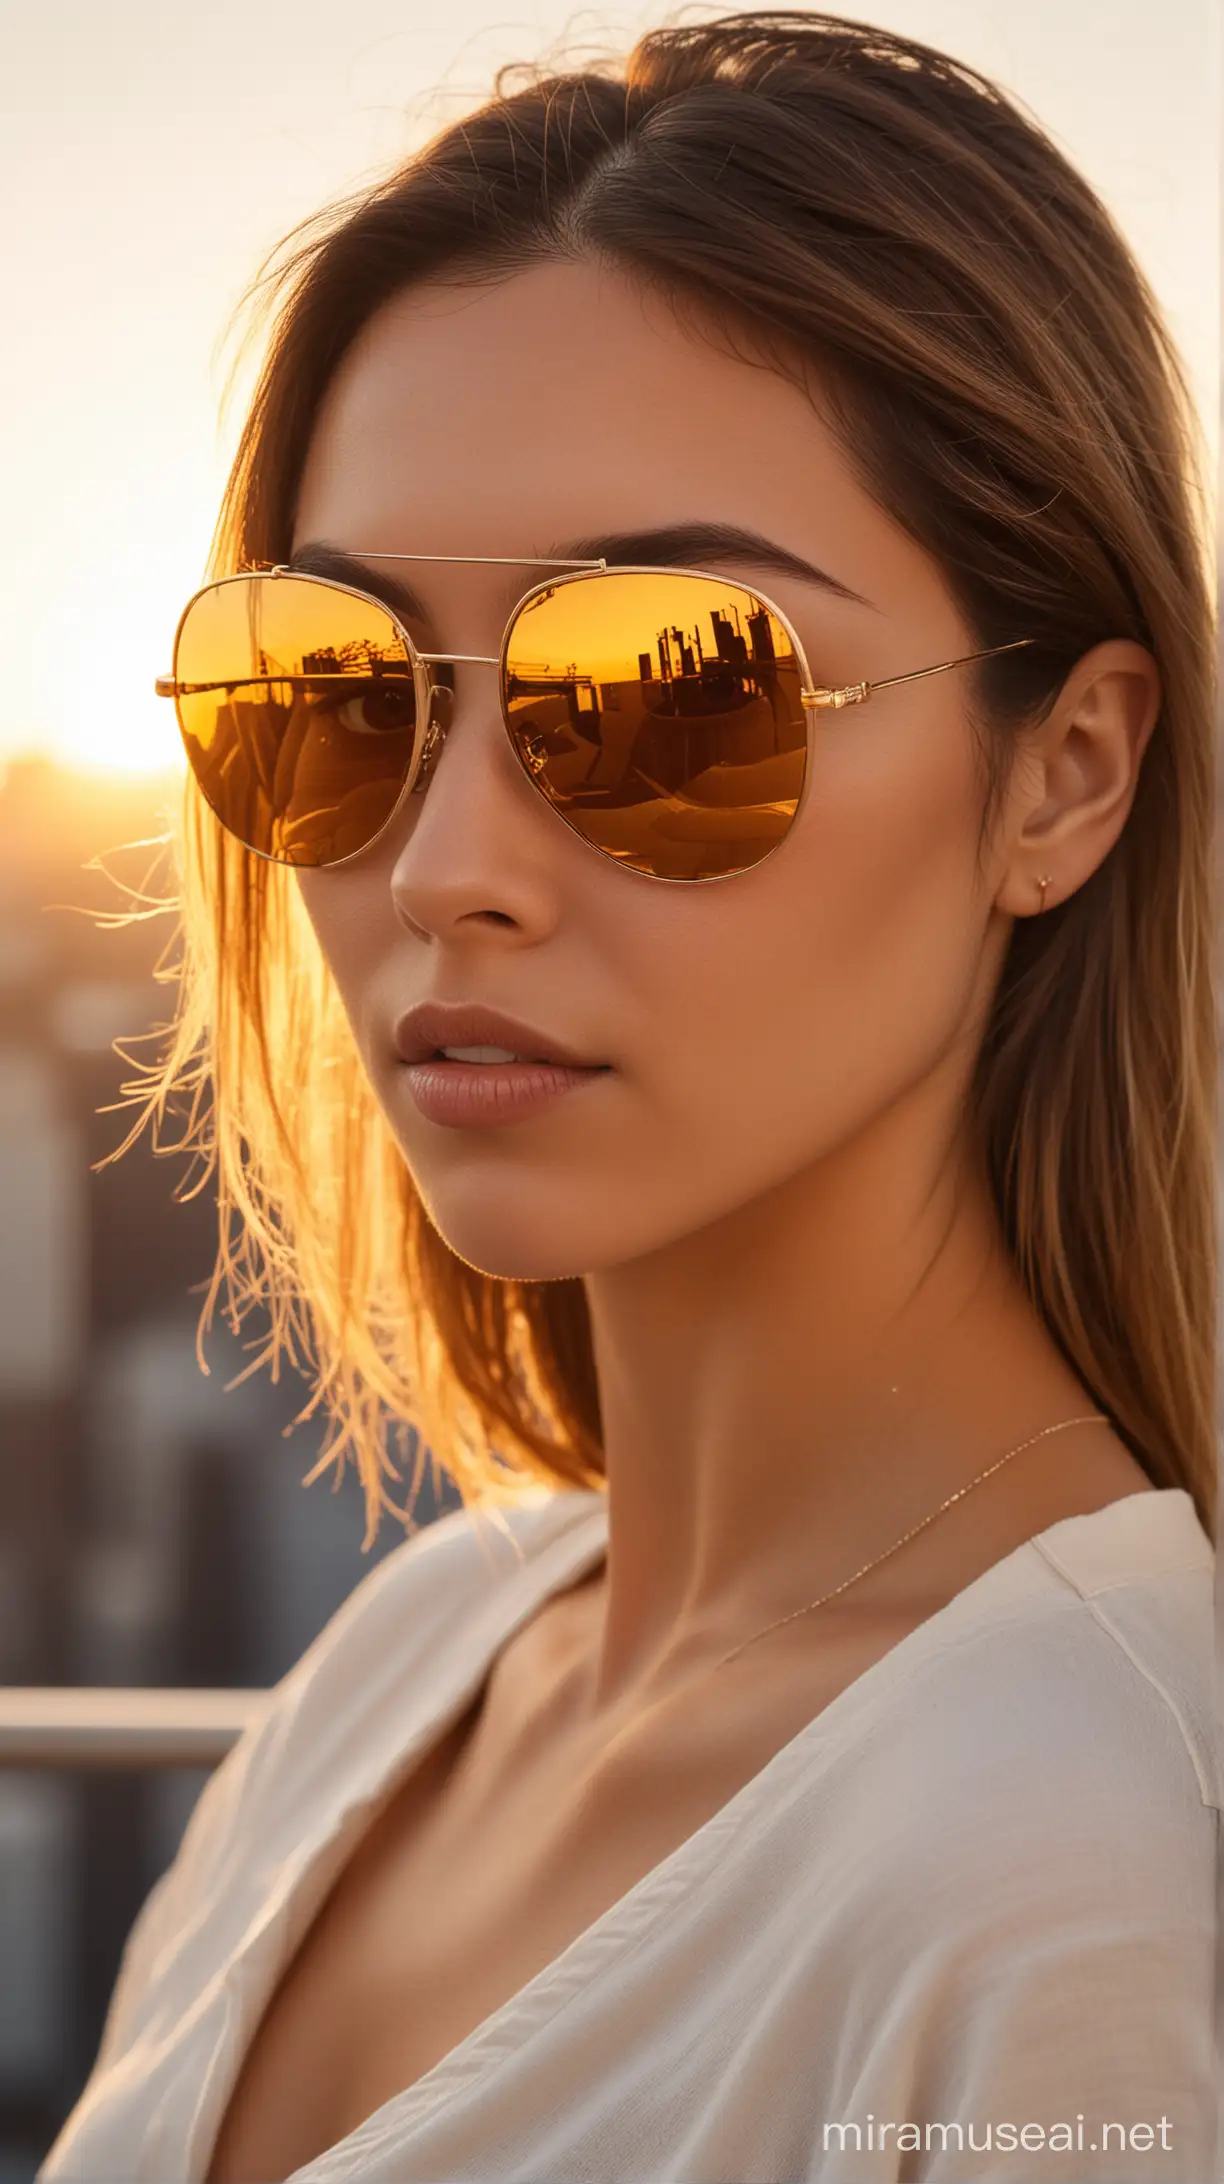 Women's sunglasses, chic fashion, urban rooftop, sultry evening. Reflective lenses, DSLR, wide aperture, golden hour glow, asymmetrical framing.